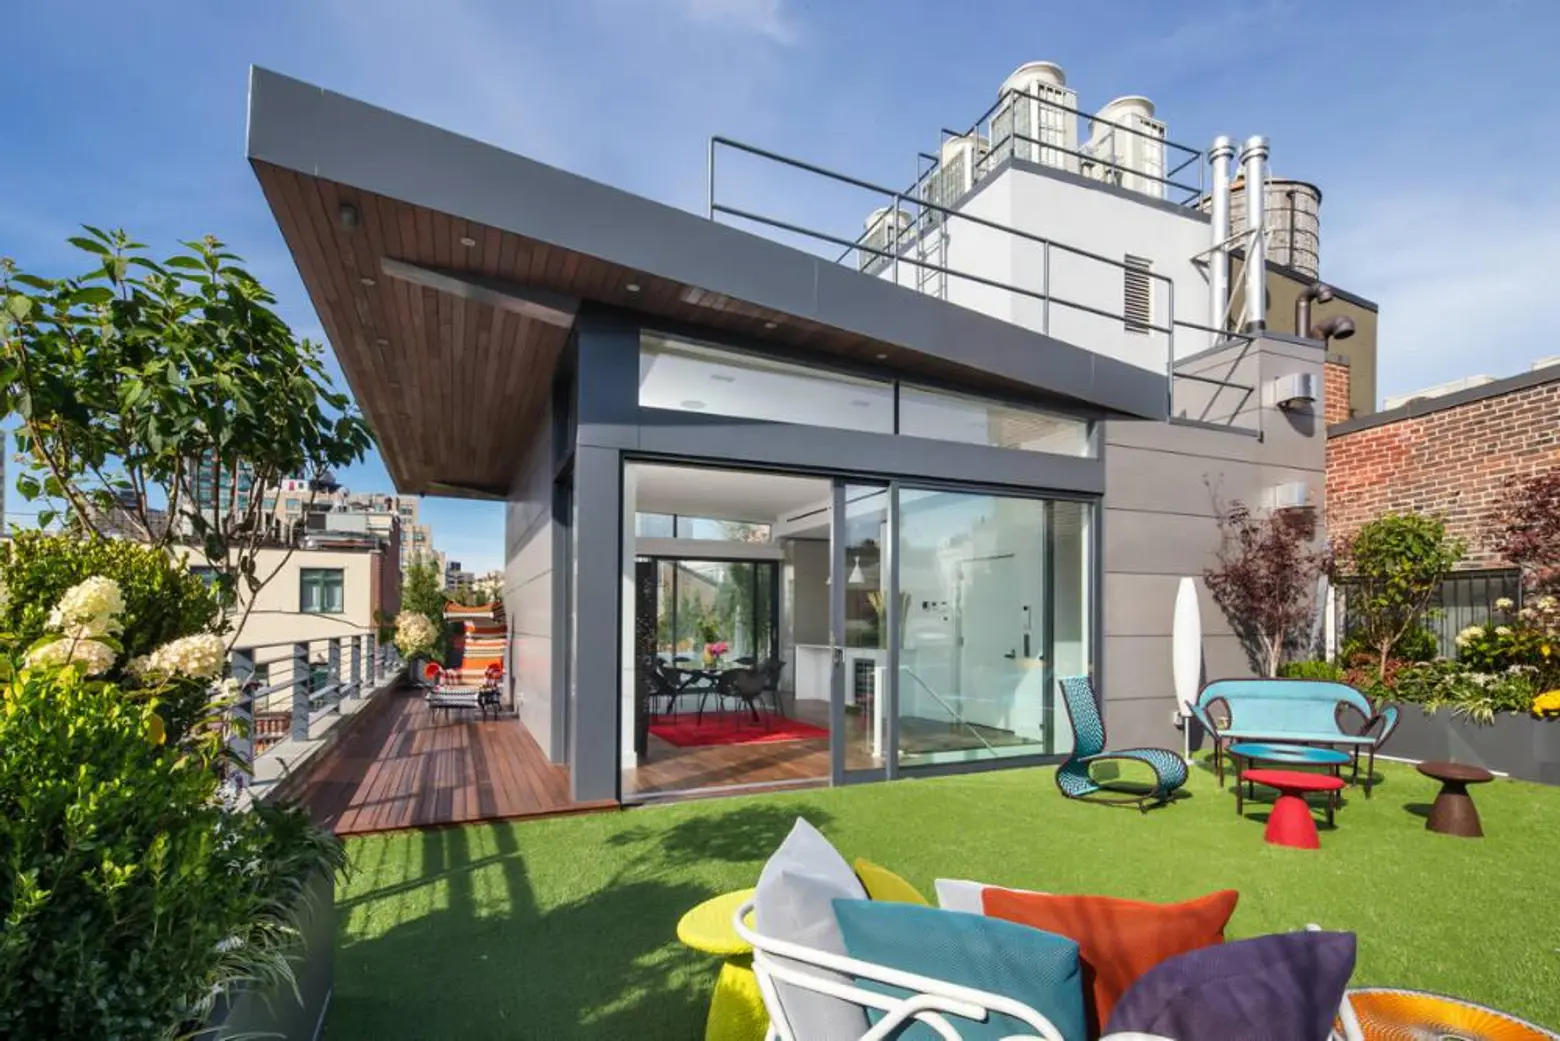 $14M Greene Street Penthouse Features Fun Furniture and Fantastic Views